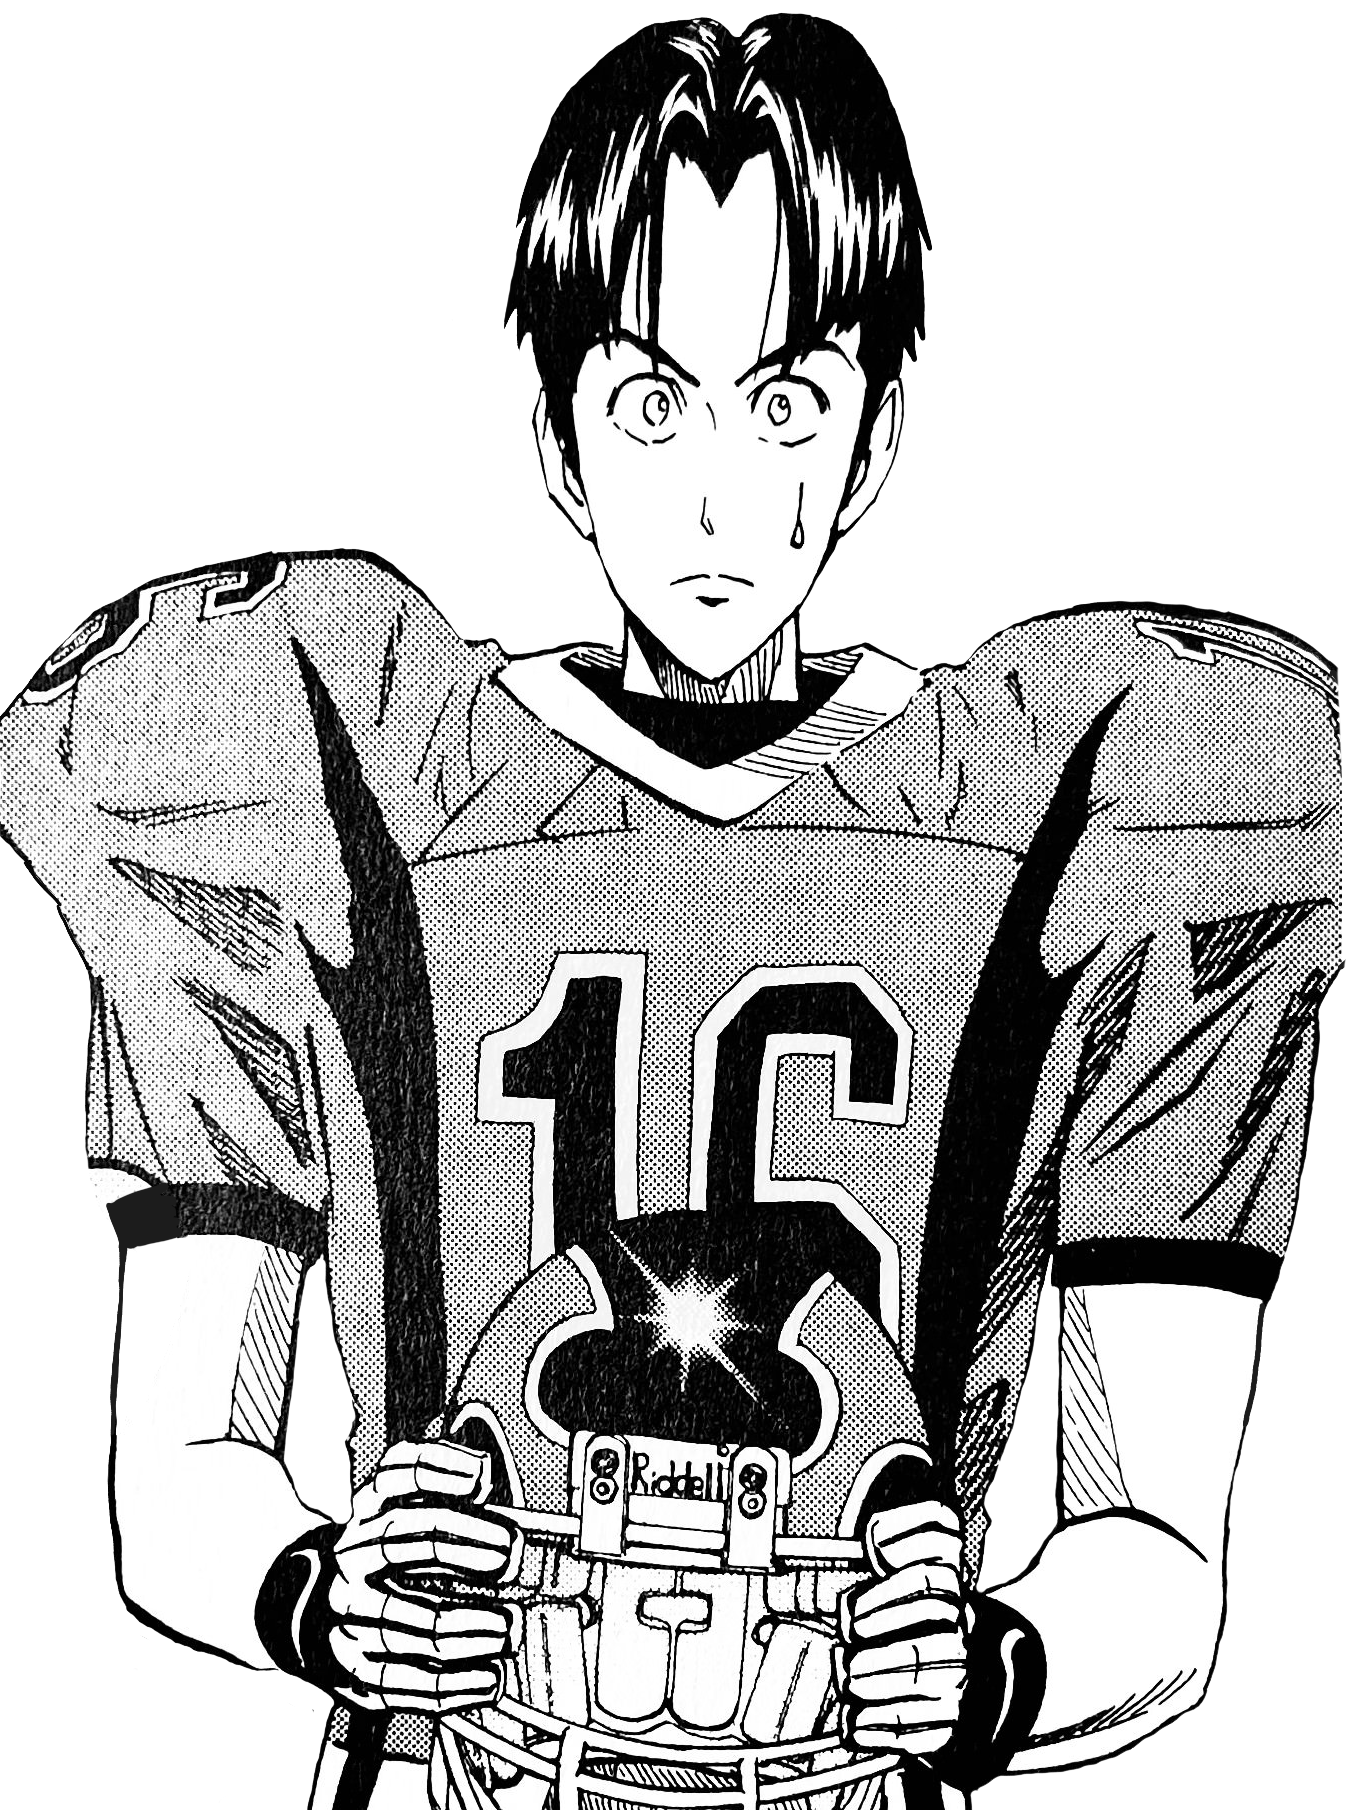 A transparent illustration of Yukimitsu in his team uniform. He's sporting a youthful curtain haircut, holding his helmet, and narrowing his eyes with determination.